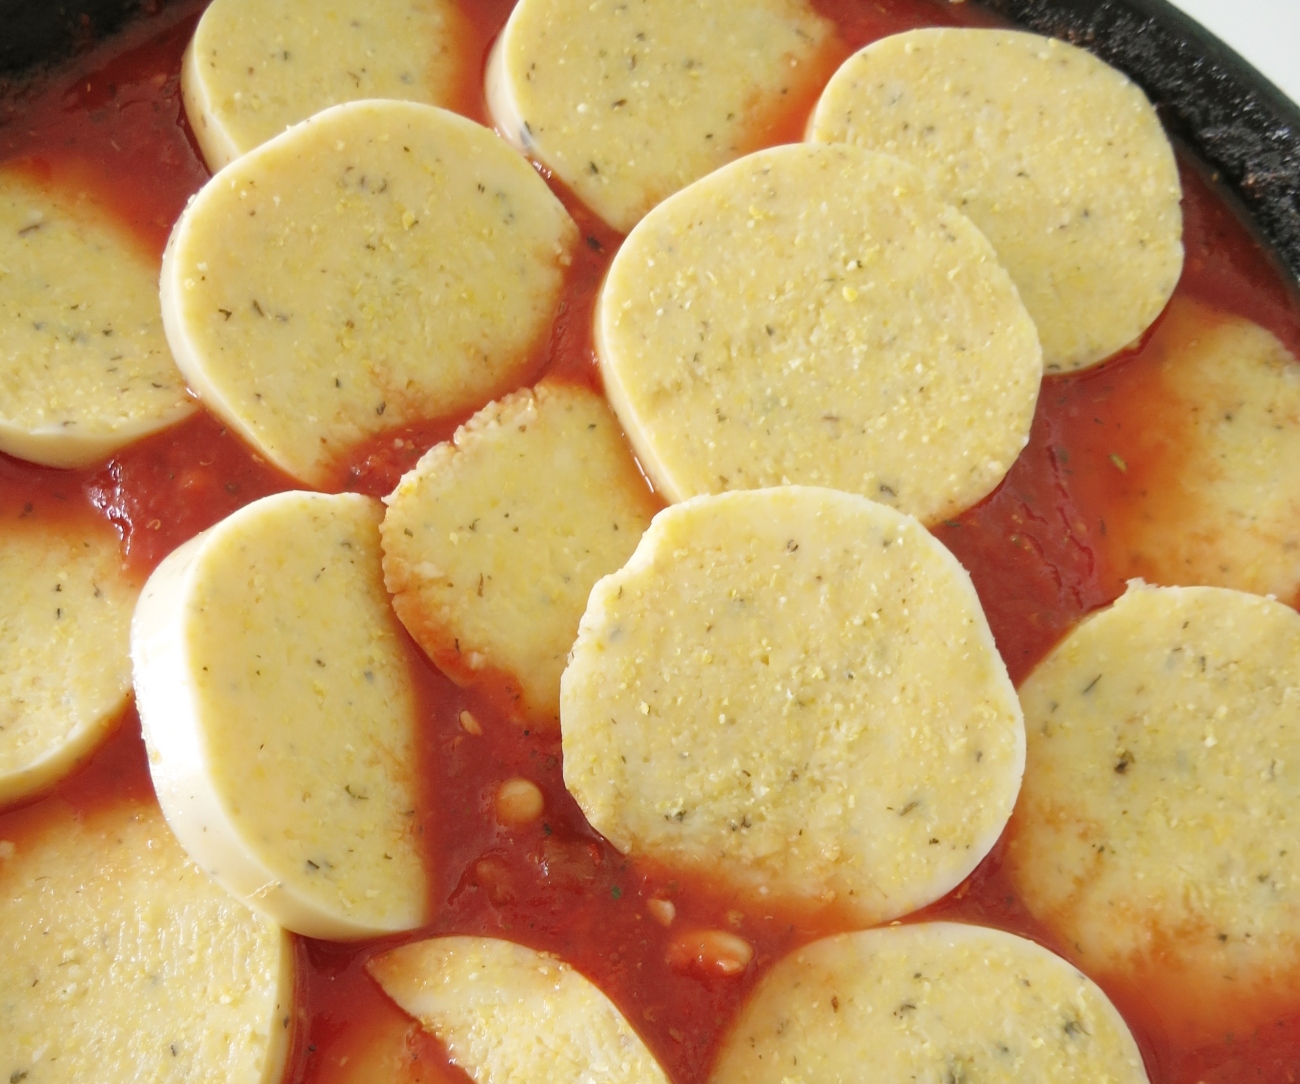 Gently add polenta slices on top and brush with remaining olive oil. Do not submerge polenta in tomato sauce. Place under broiler set to low for 4-6 minutes or until polenta just begins to brown on top. Do not step away from stove at this point and check on skillet every minute or two.